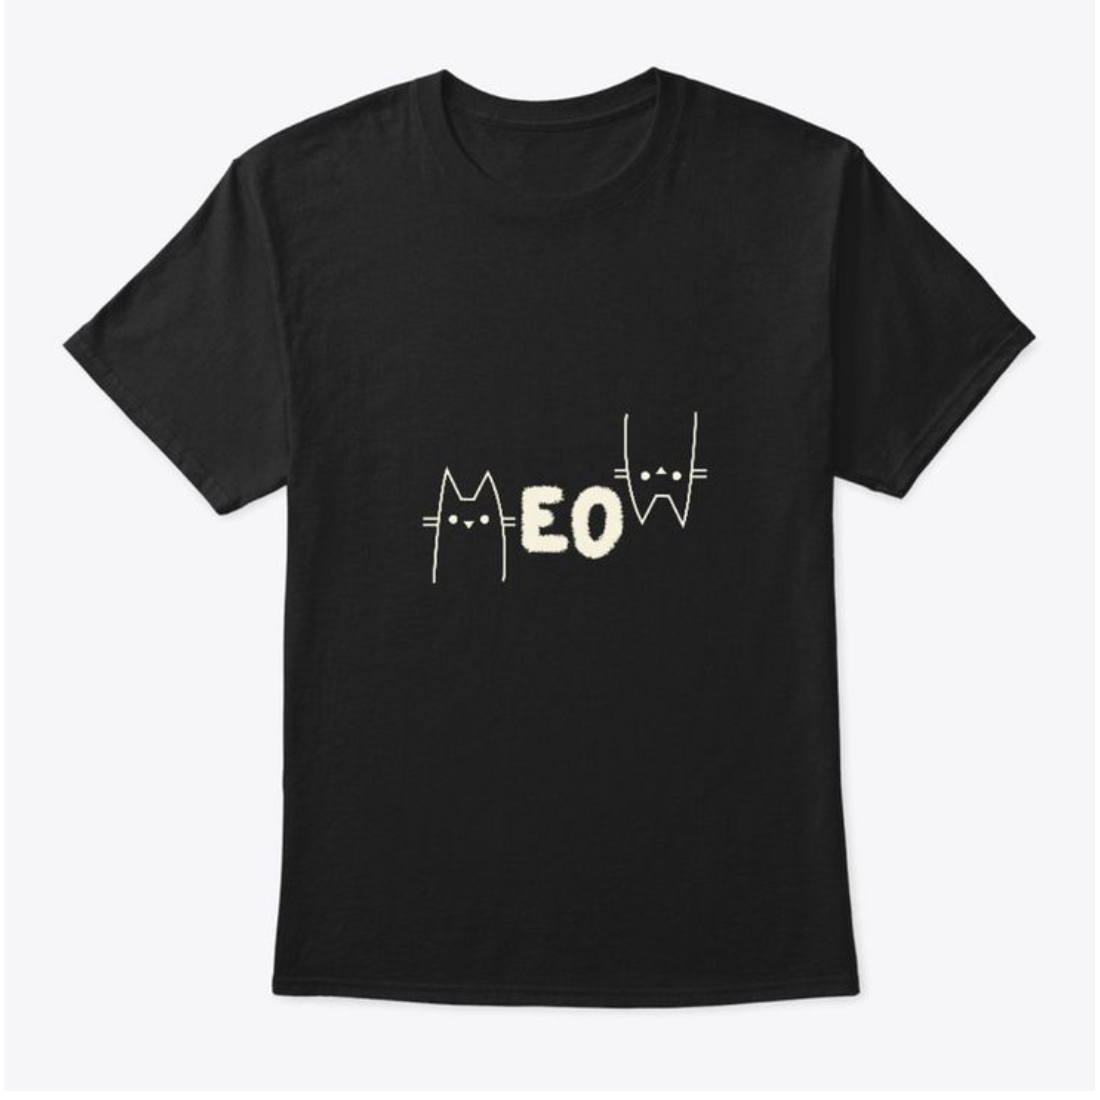 Black t - shirt with the word eq printed on it.